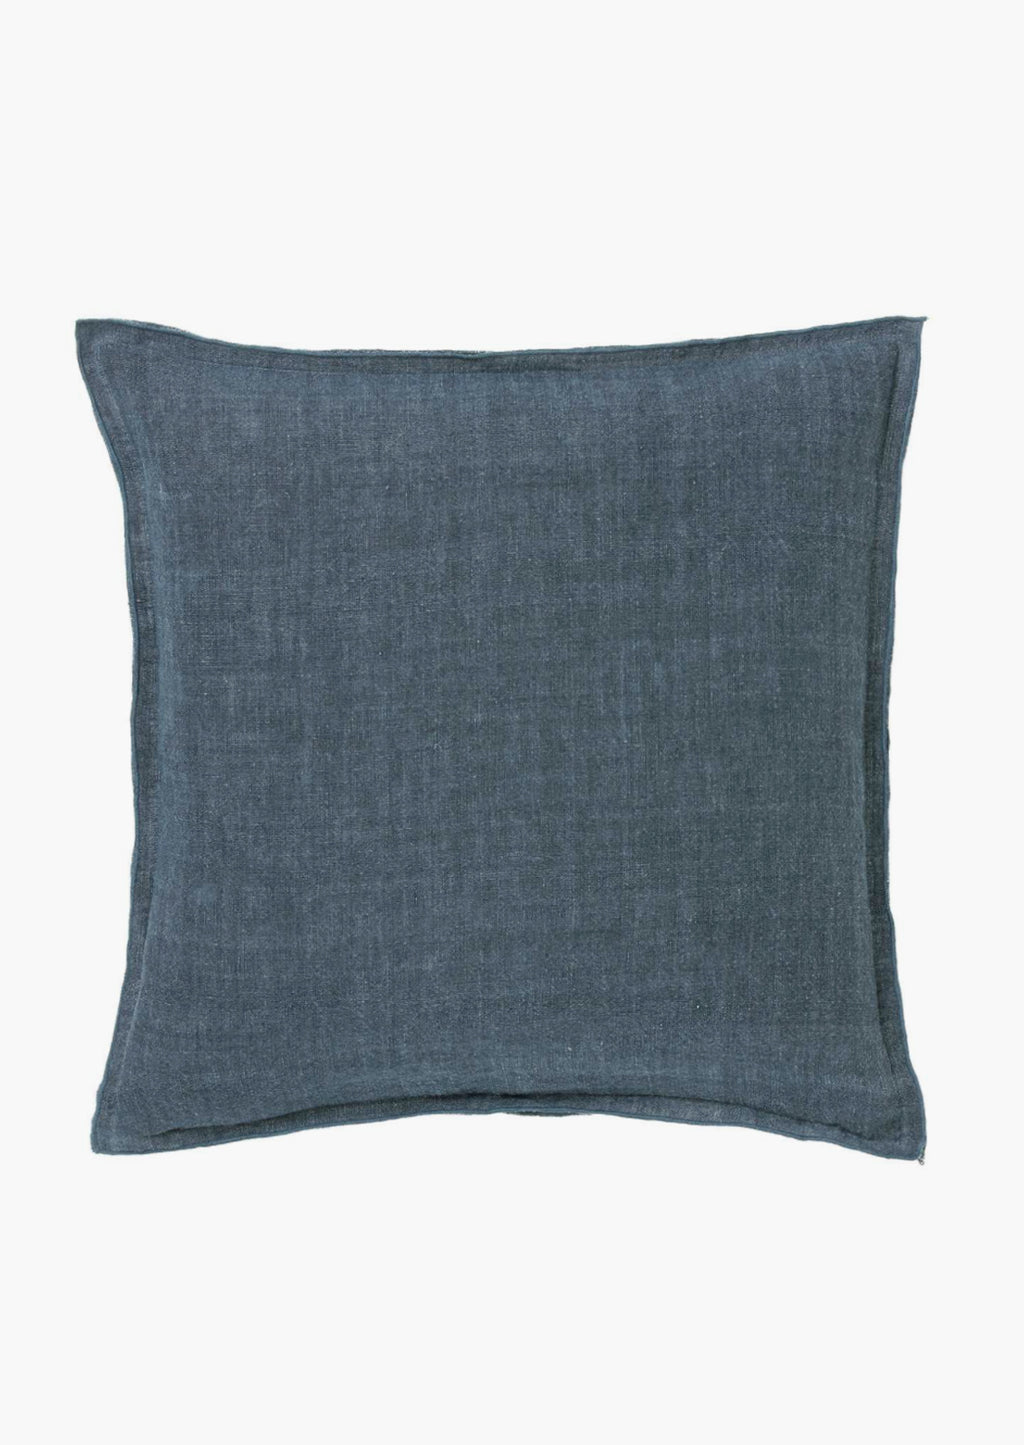 Marine: A solid linen pillow in marine blue.